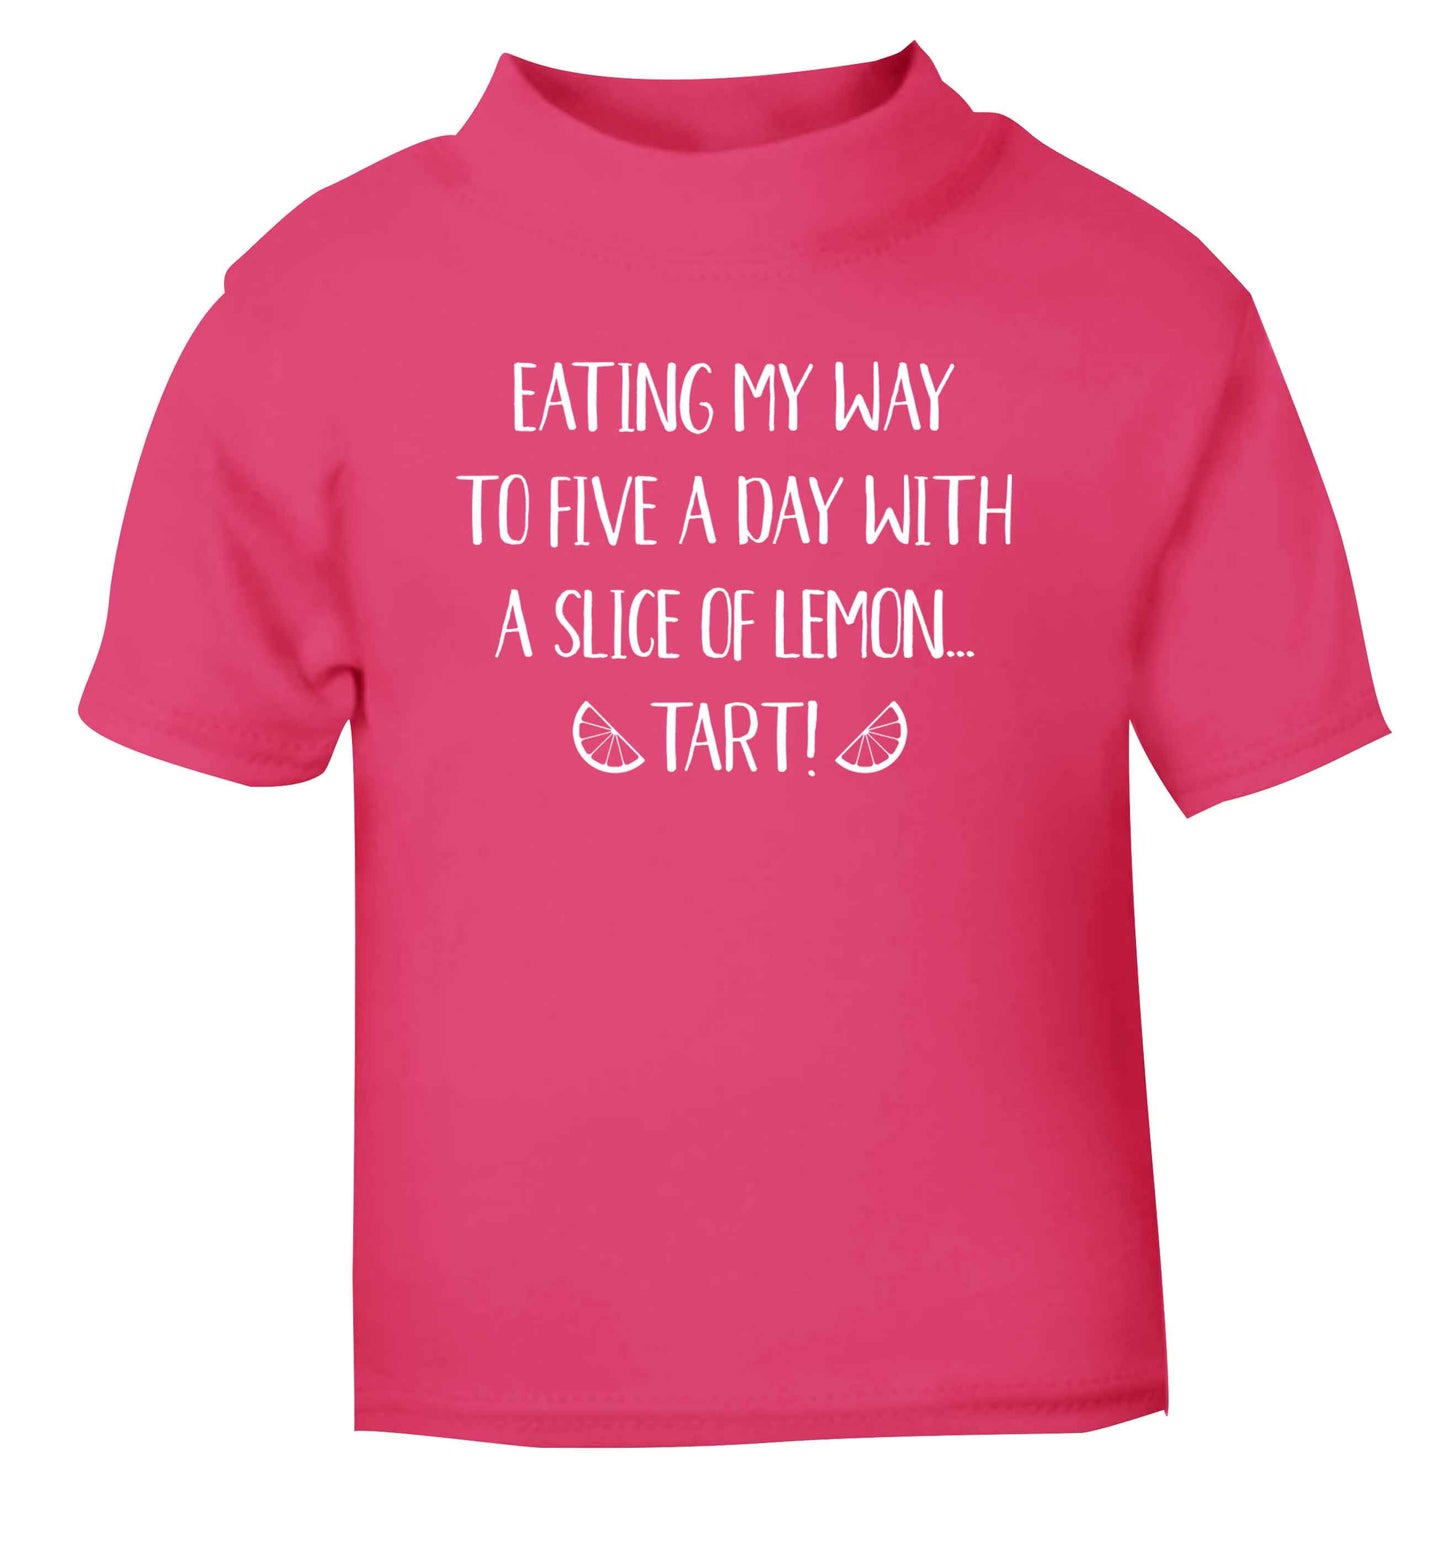 Eating my way to five a day with a slice of lemon tart pink Baby Toddler Tshirt 2 Years